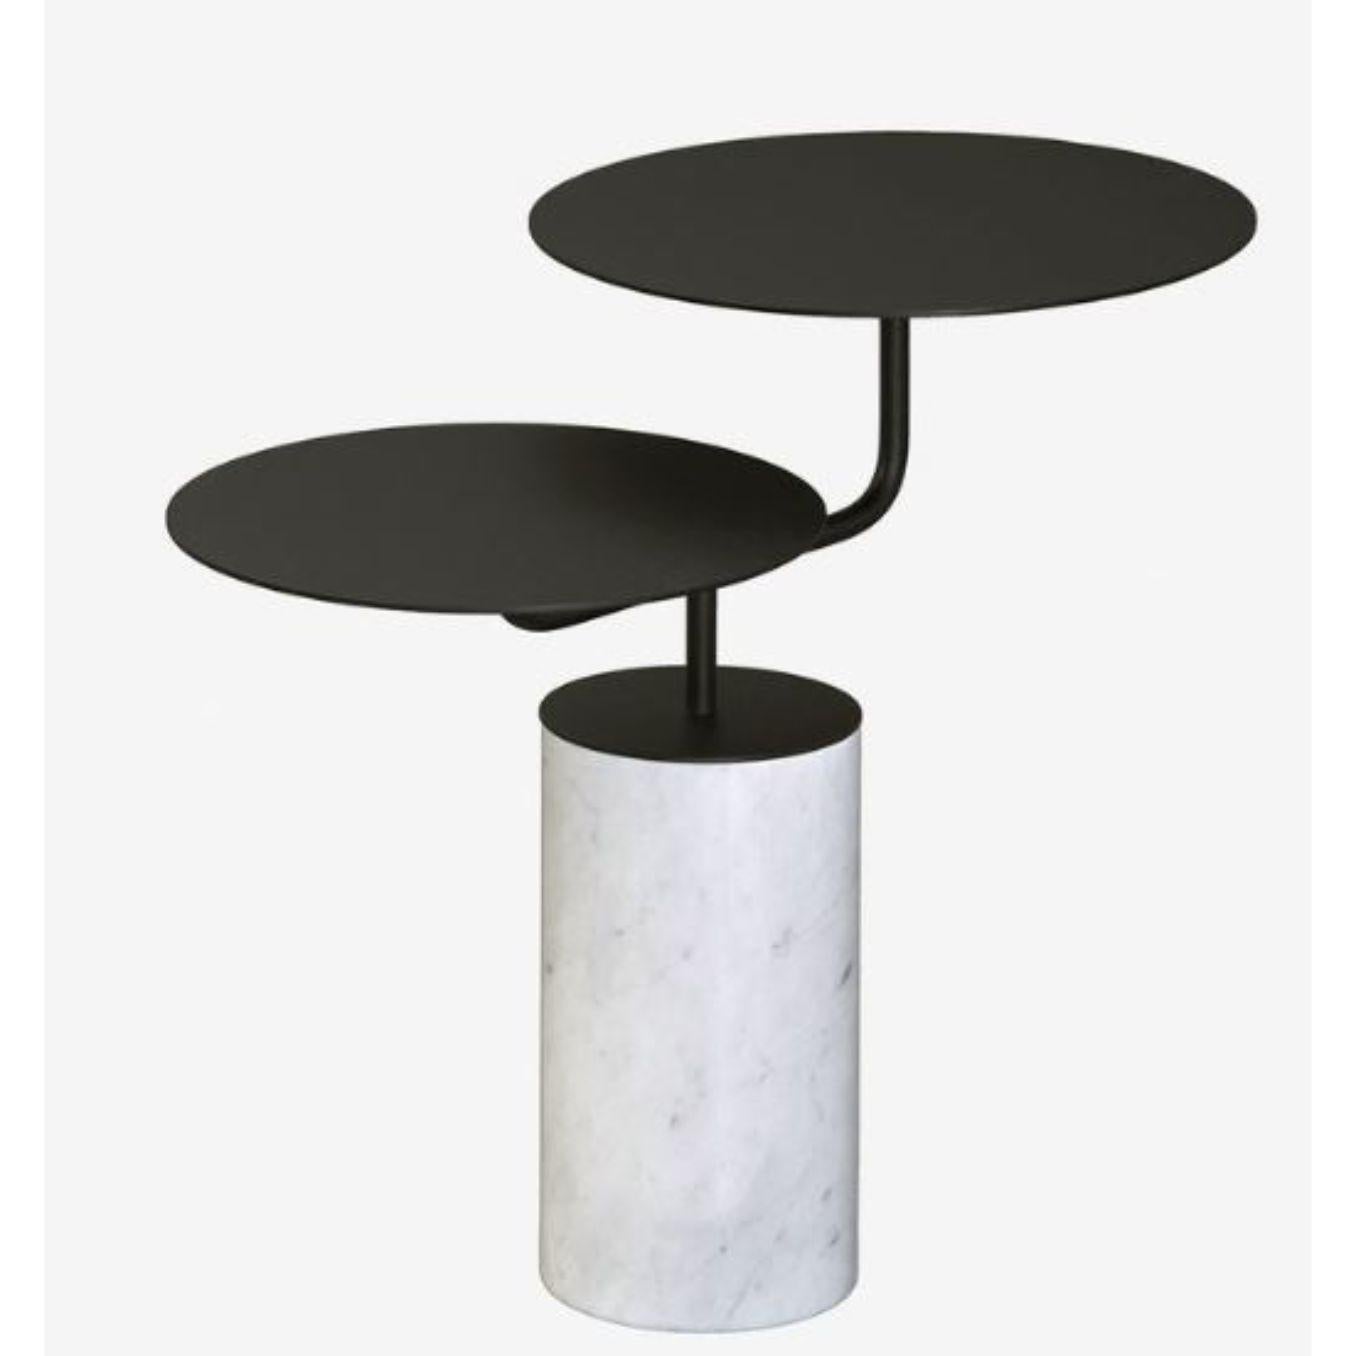 Groom side table by RADAR
Design: Bastien Taillard
Materials: metal, carrara marble.
Dimensions: W 35 x D 60 x H 51 cm
Also available with solid oak base.

Elegant, timeless, understated. The RADAR collection allows you to take a welcome break